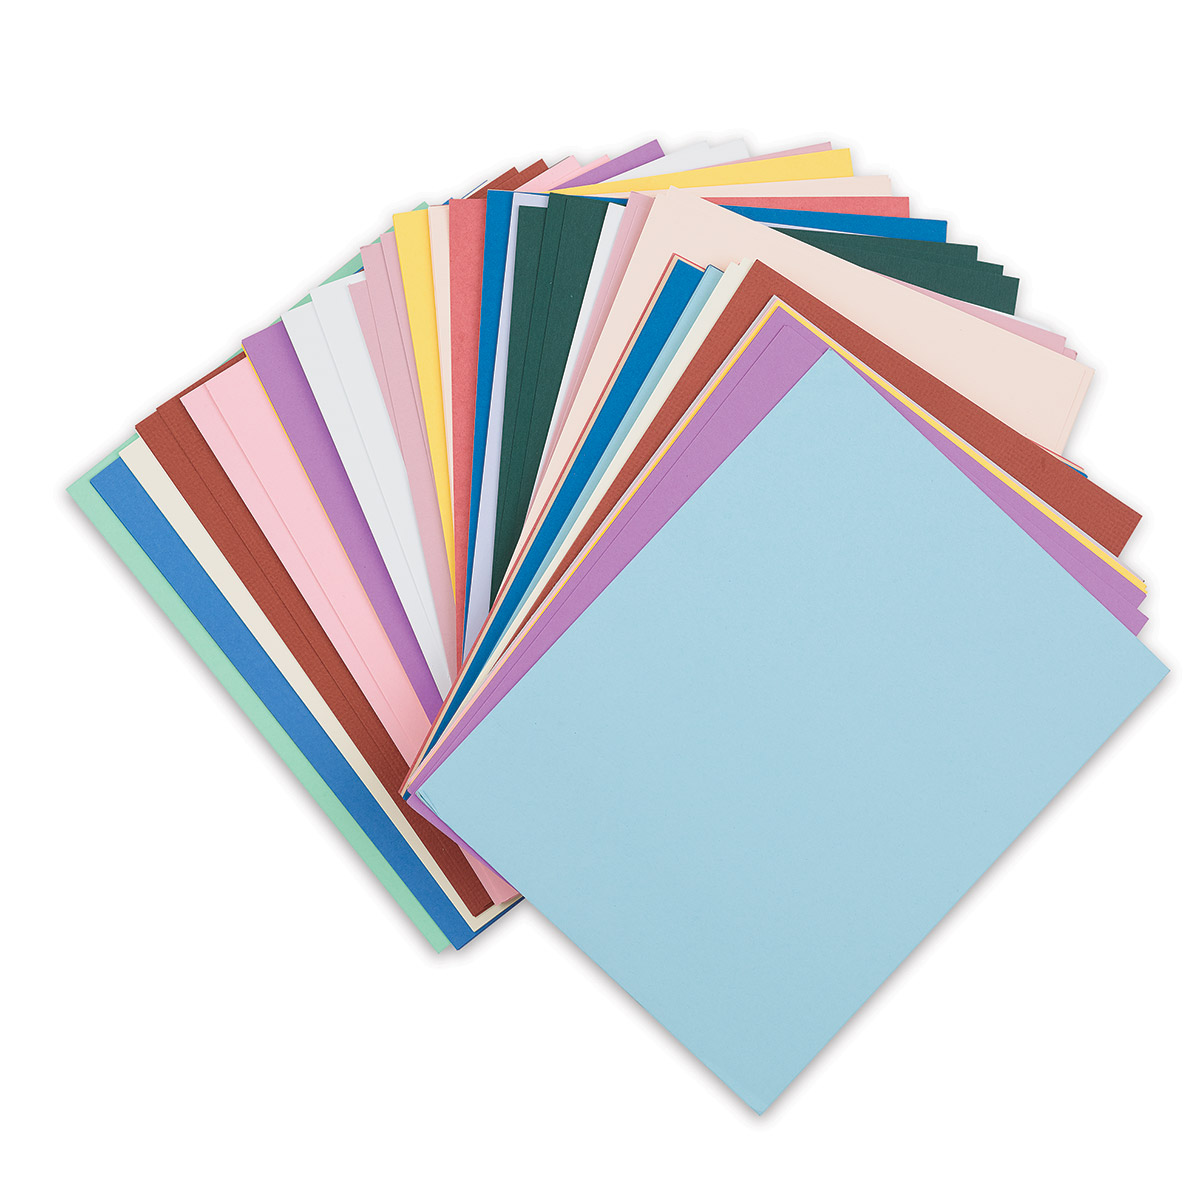 Paper Accents Cardstock Super Value Pack